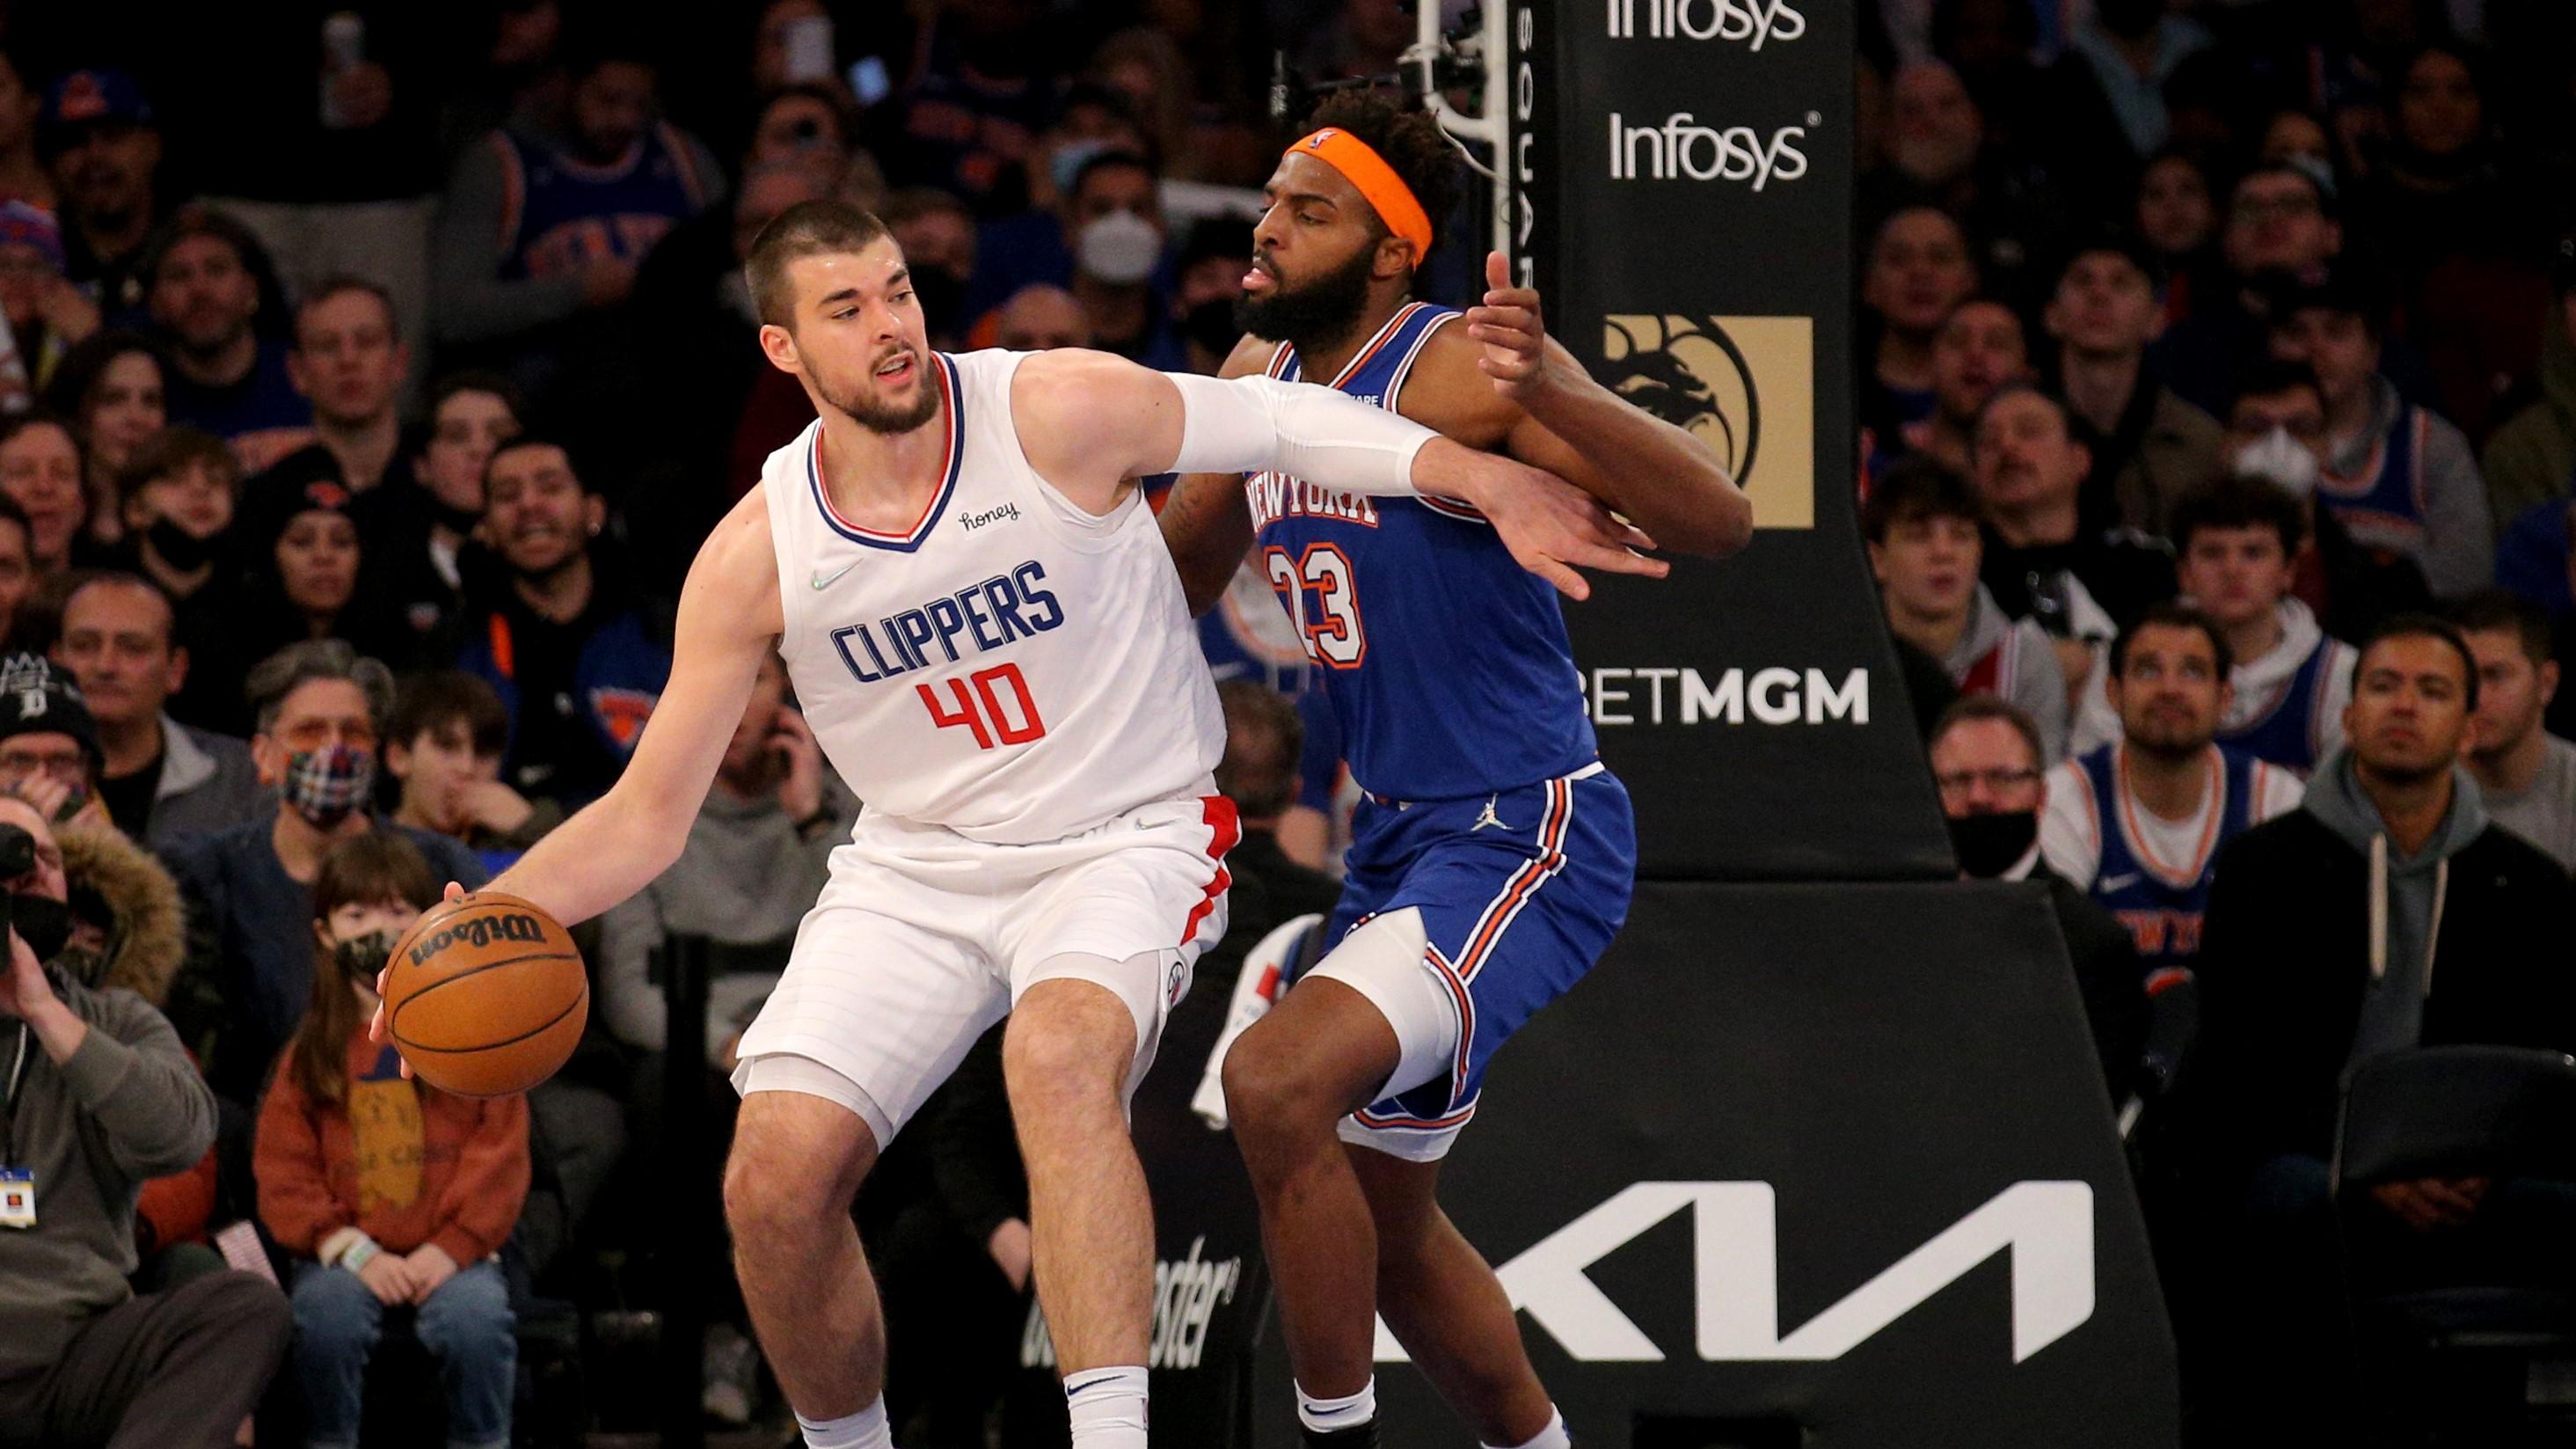 Jan 23, 2022; New York, New York, USA; Los Angeles Clippers center Ivica Zubac (40) controls the ball against New York Knicks center Mitchell Robinson (23) during the first quarter at Madison Square Garden. / Brad Penner-USA TODAY Sports